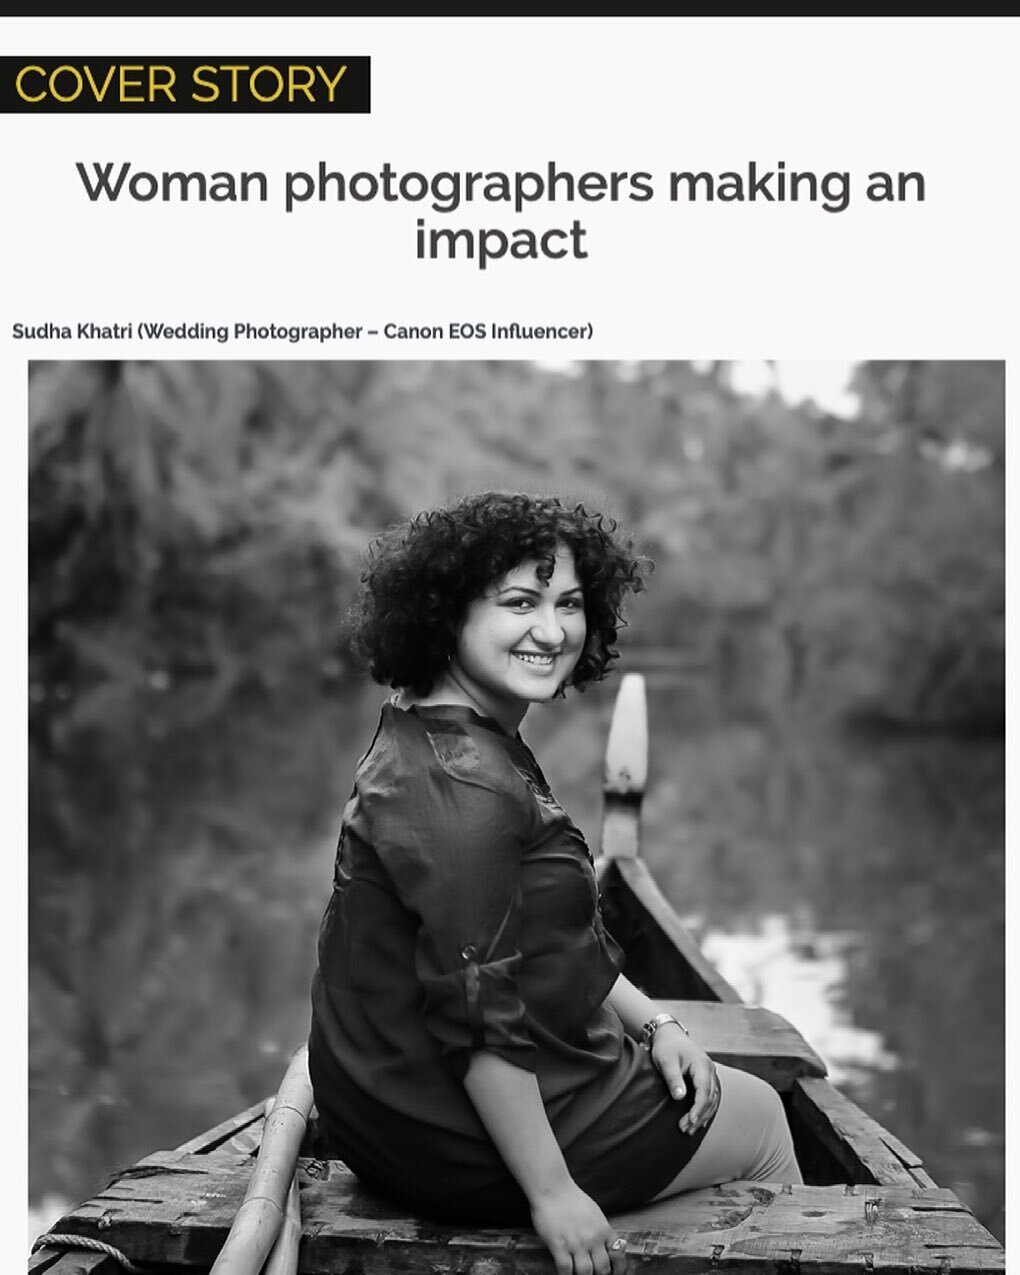 So blessed and honoured to be one the three women photographers featured in IANS covered story on this special occasion of international women's day. So grateful to all my family &amp; friends, clients, community &amp; everyone's continued support fo